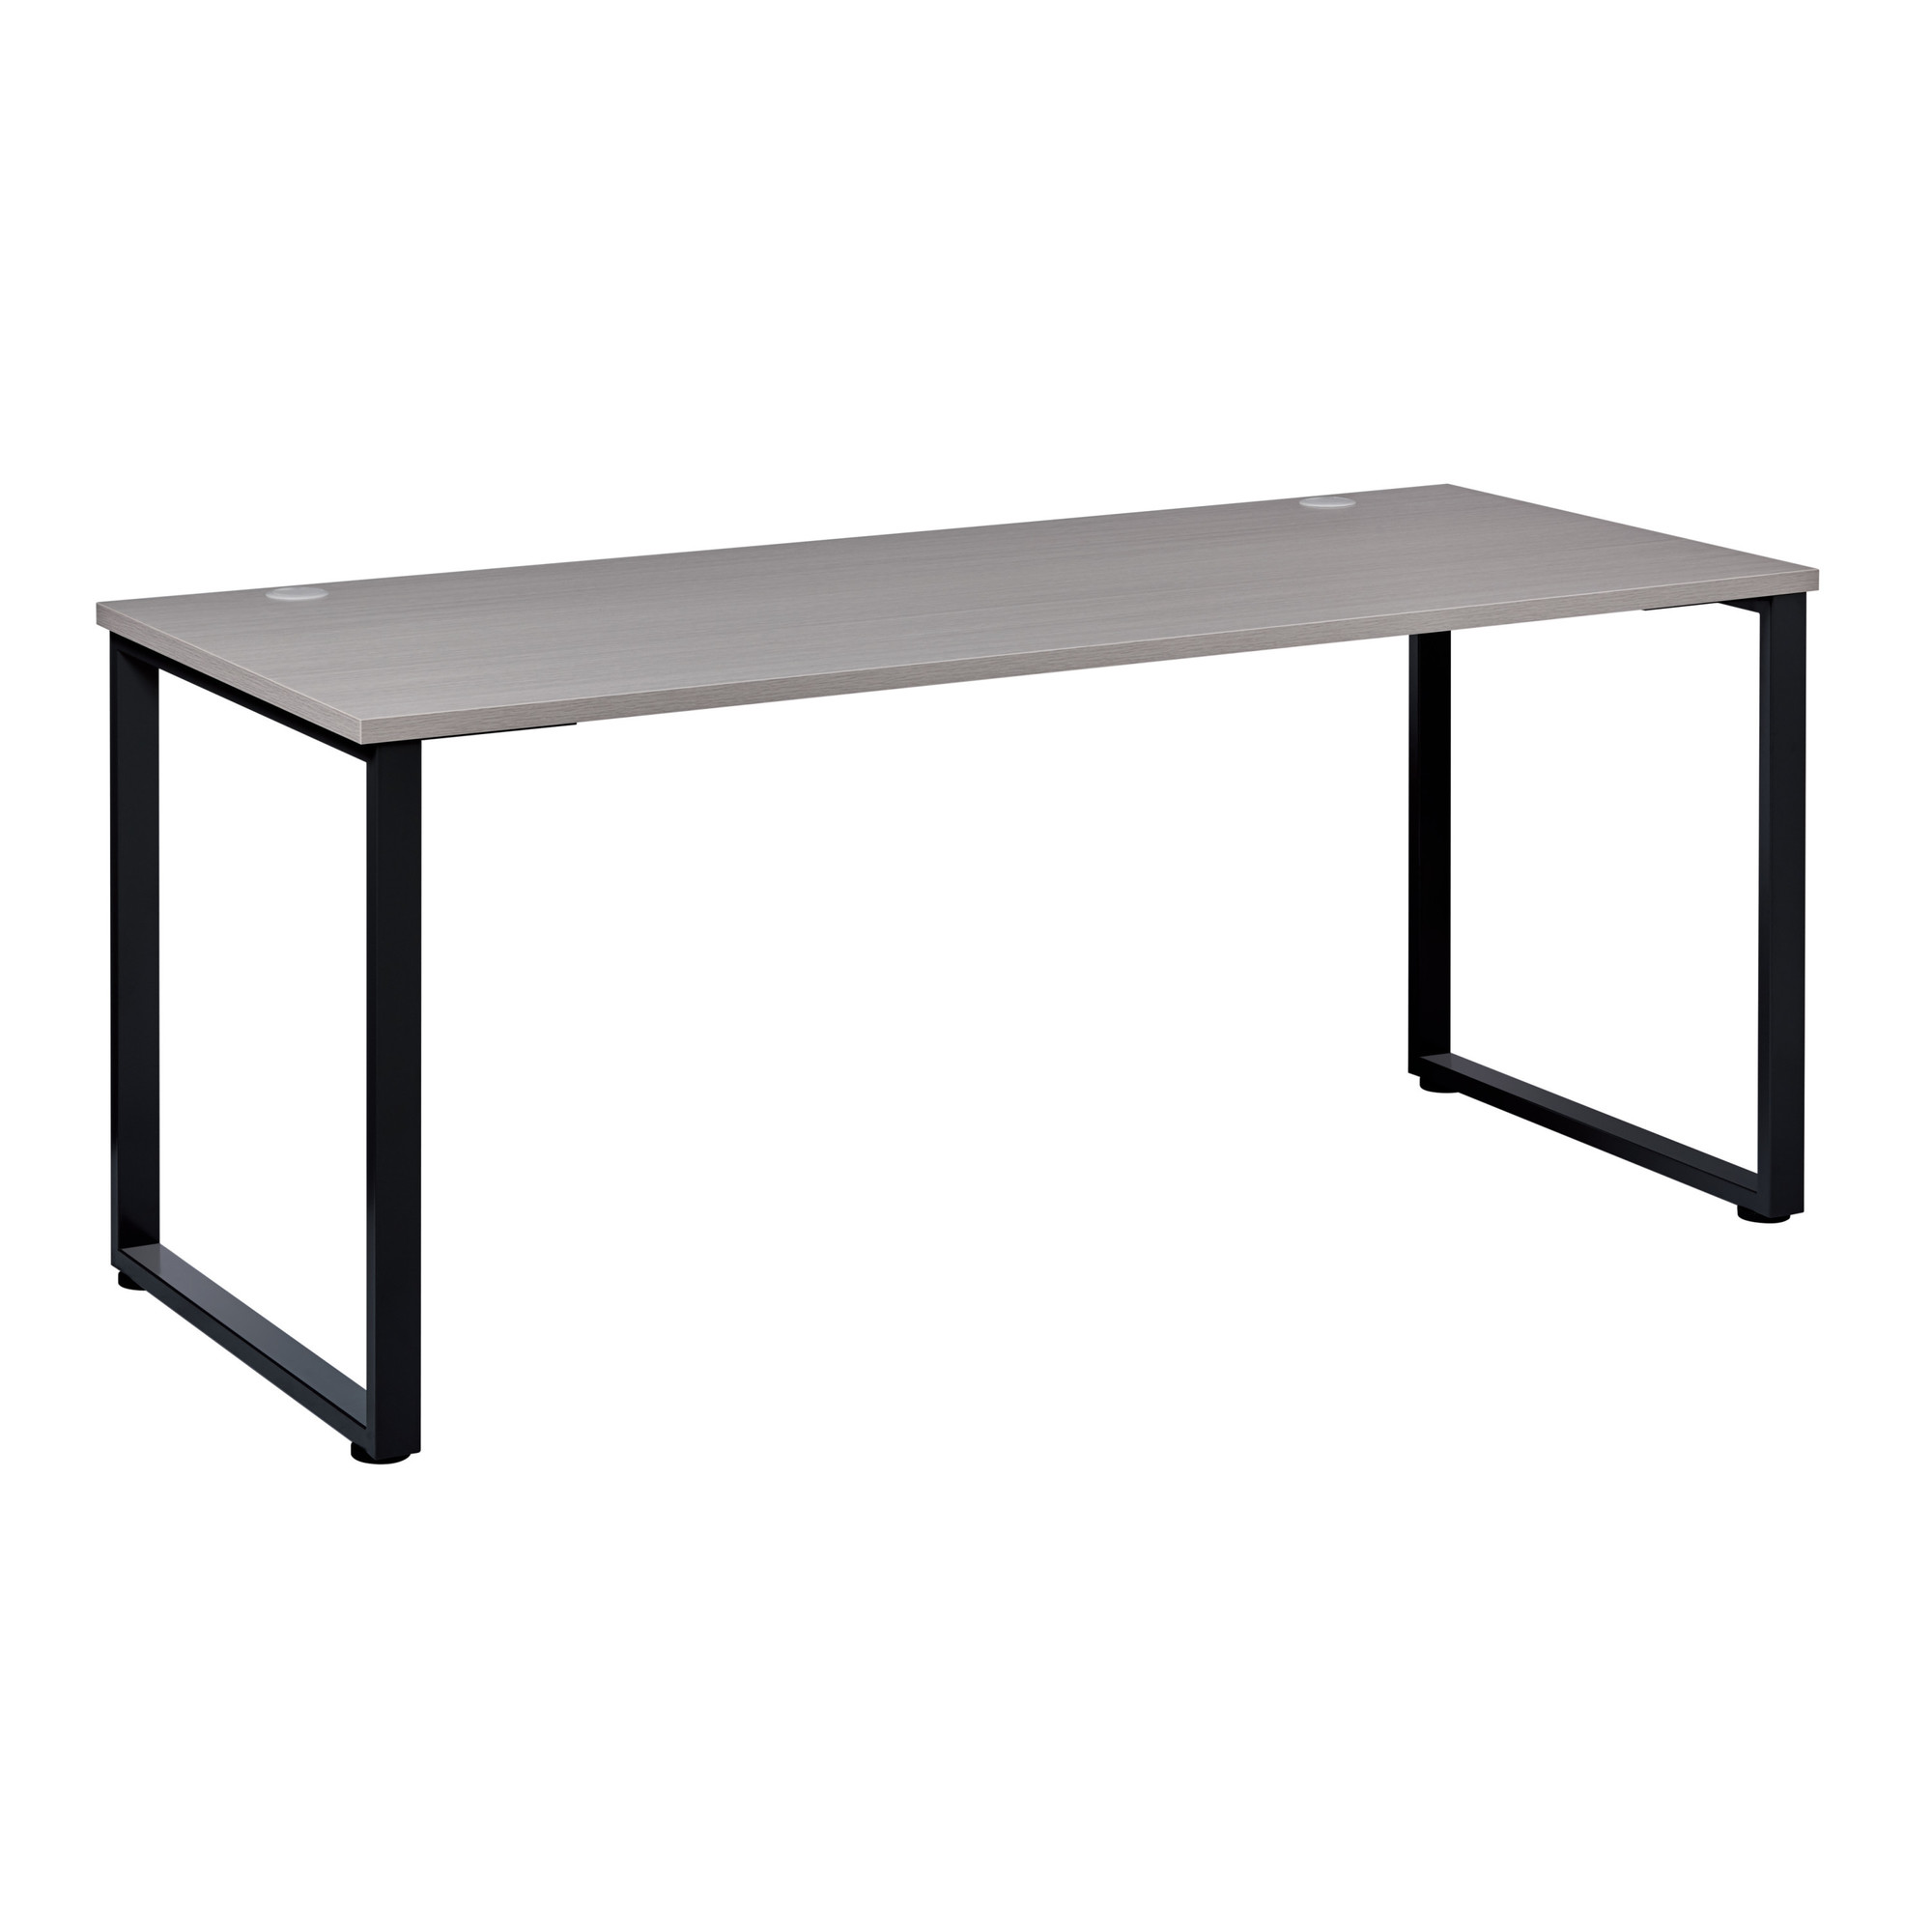 Hirsh Industries, Office Dimensions Open Desk with O-leg, Width 59 in, Height 29.9 in, Depth 23.6 in, Model 24785